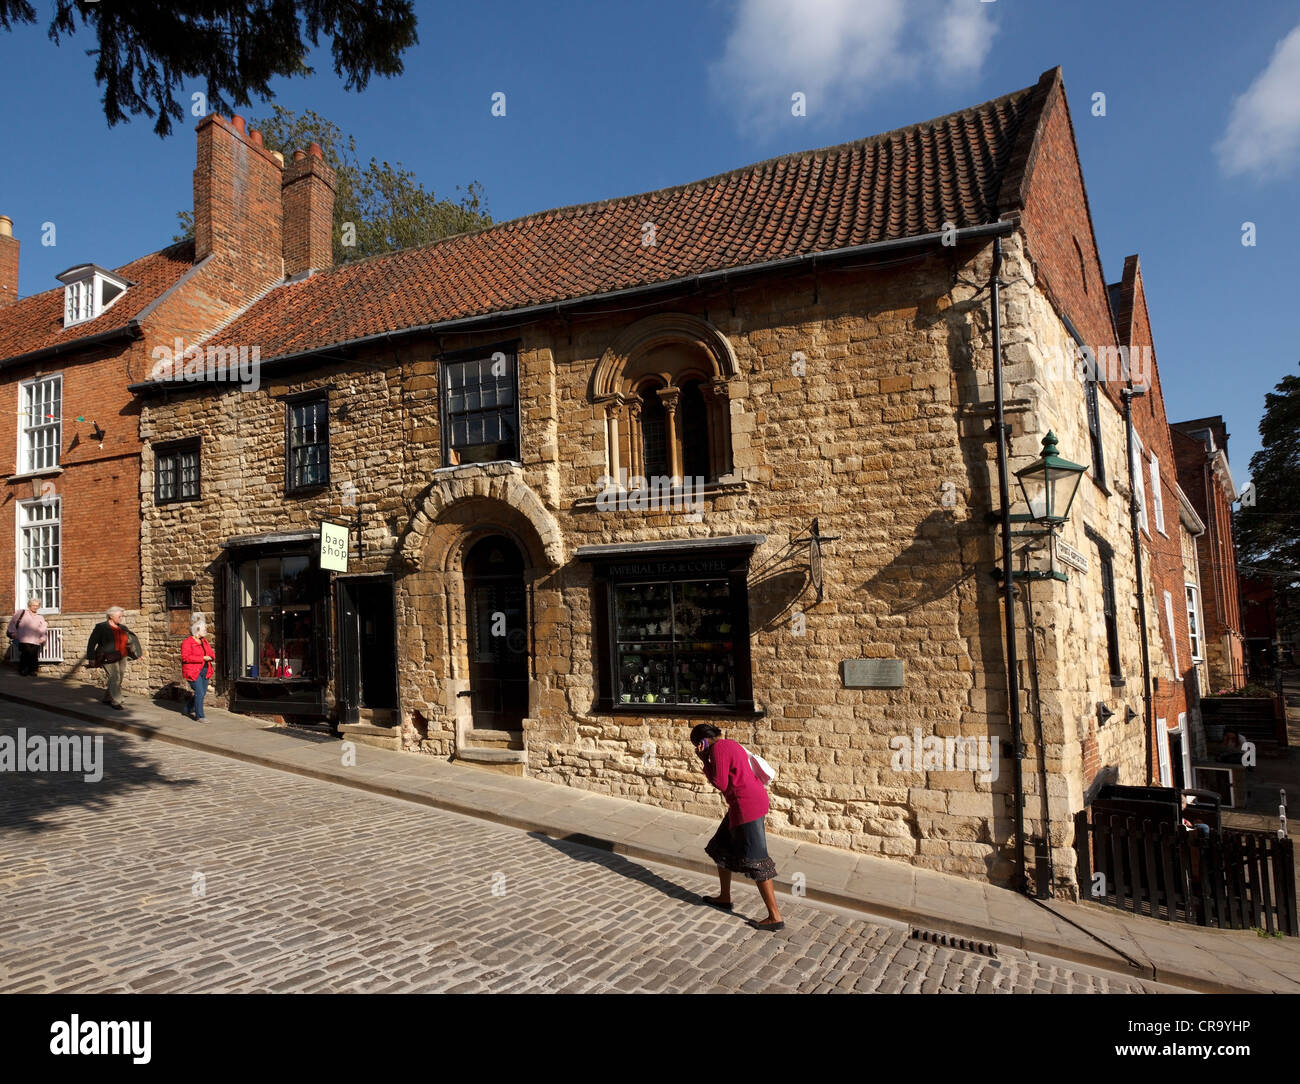 Woman struggles uphill past shops on old cobbled street, Steep Hill, Lincoln, Lincolnshire, England, UK Stock Photo